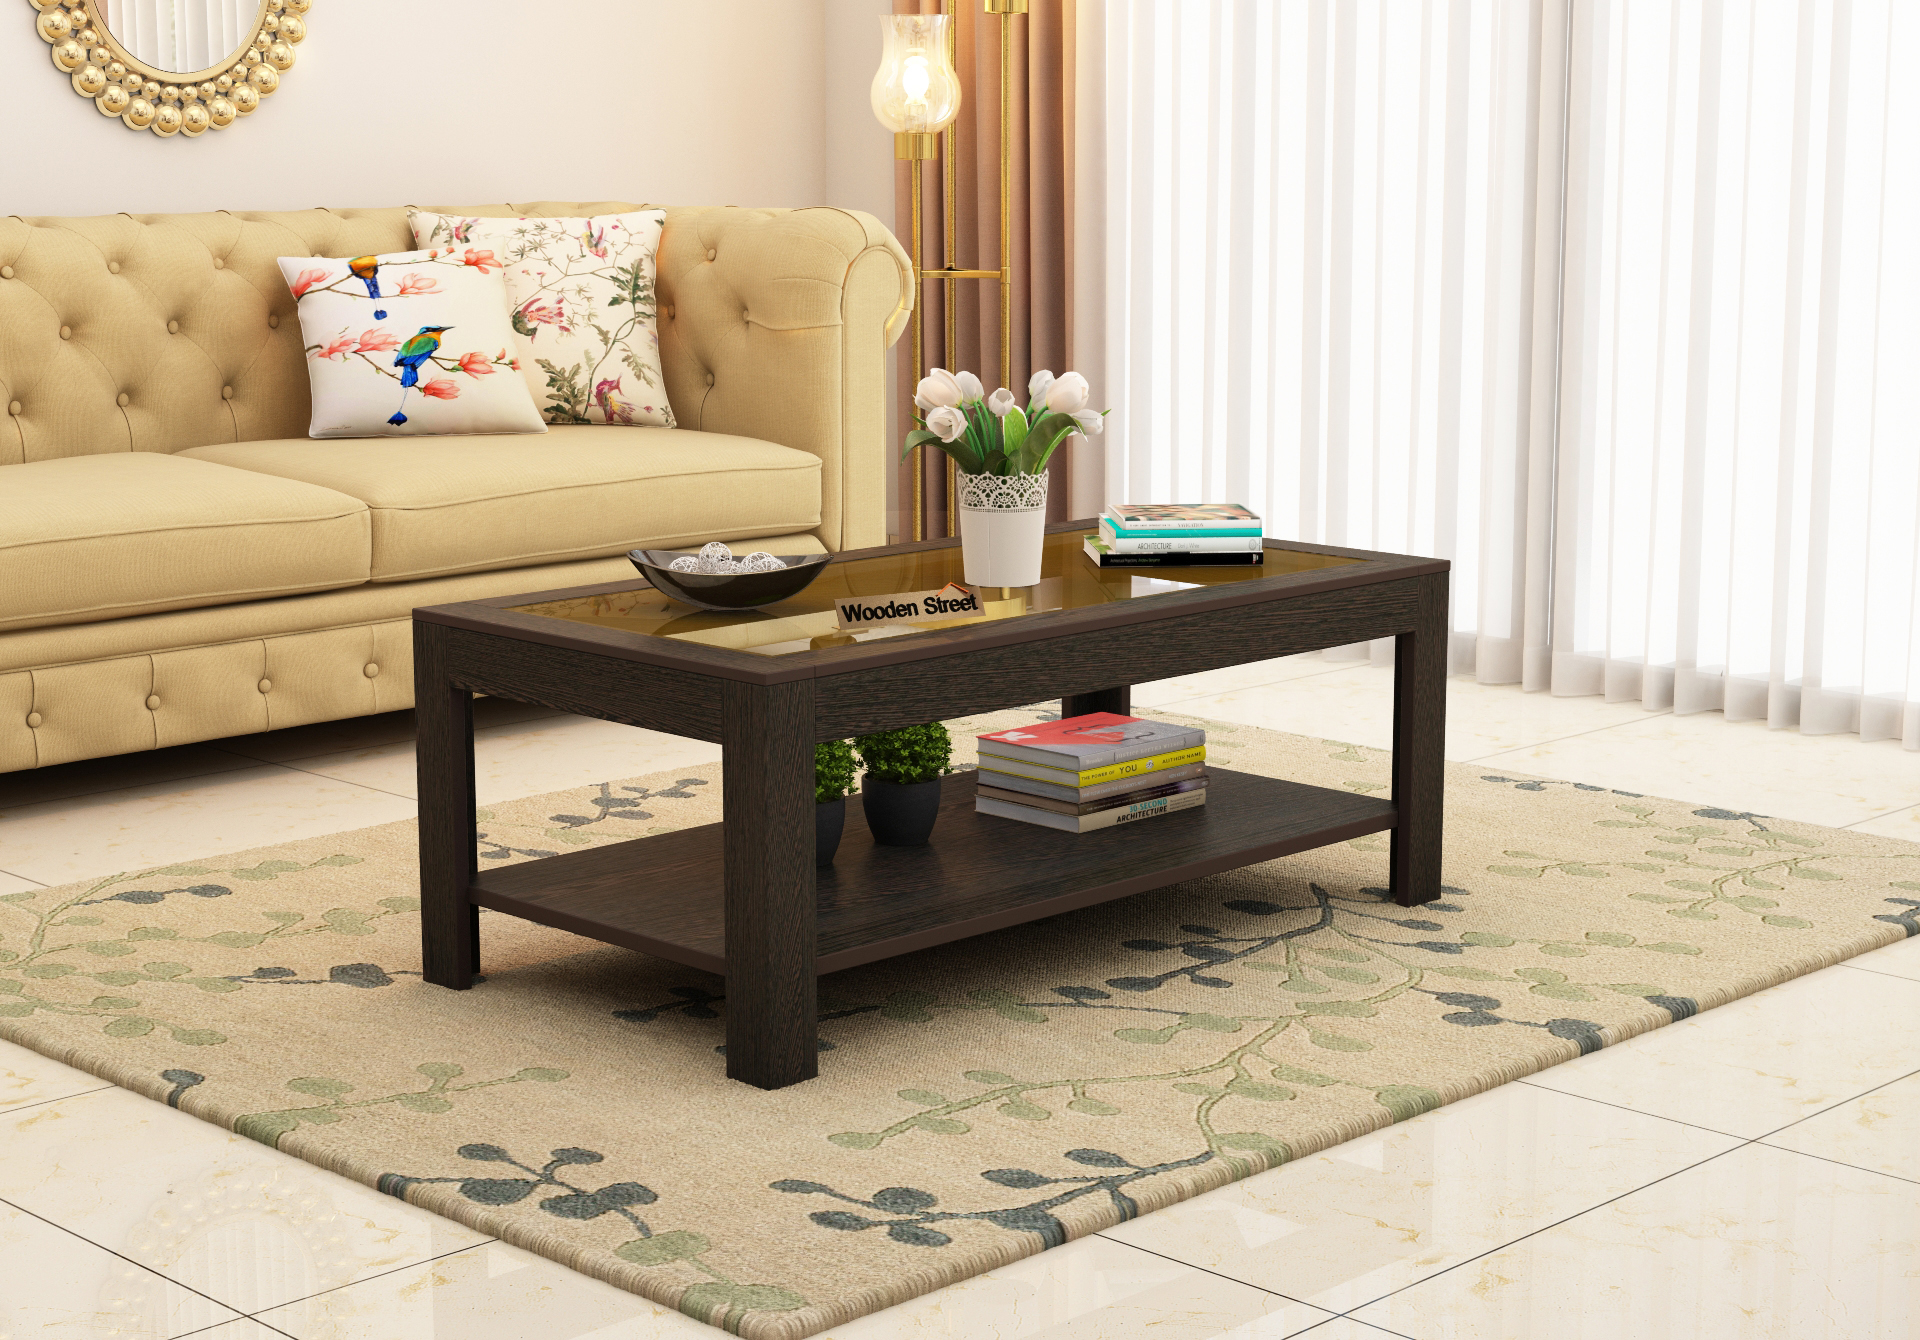 COFFEE TABLE FOR COMPLEMENTING THE SOFA SET